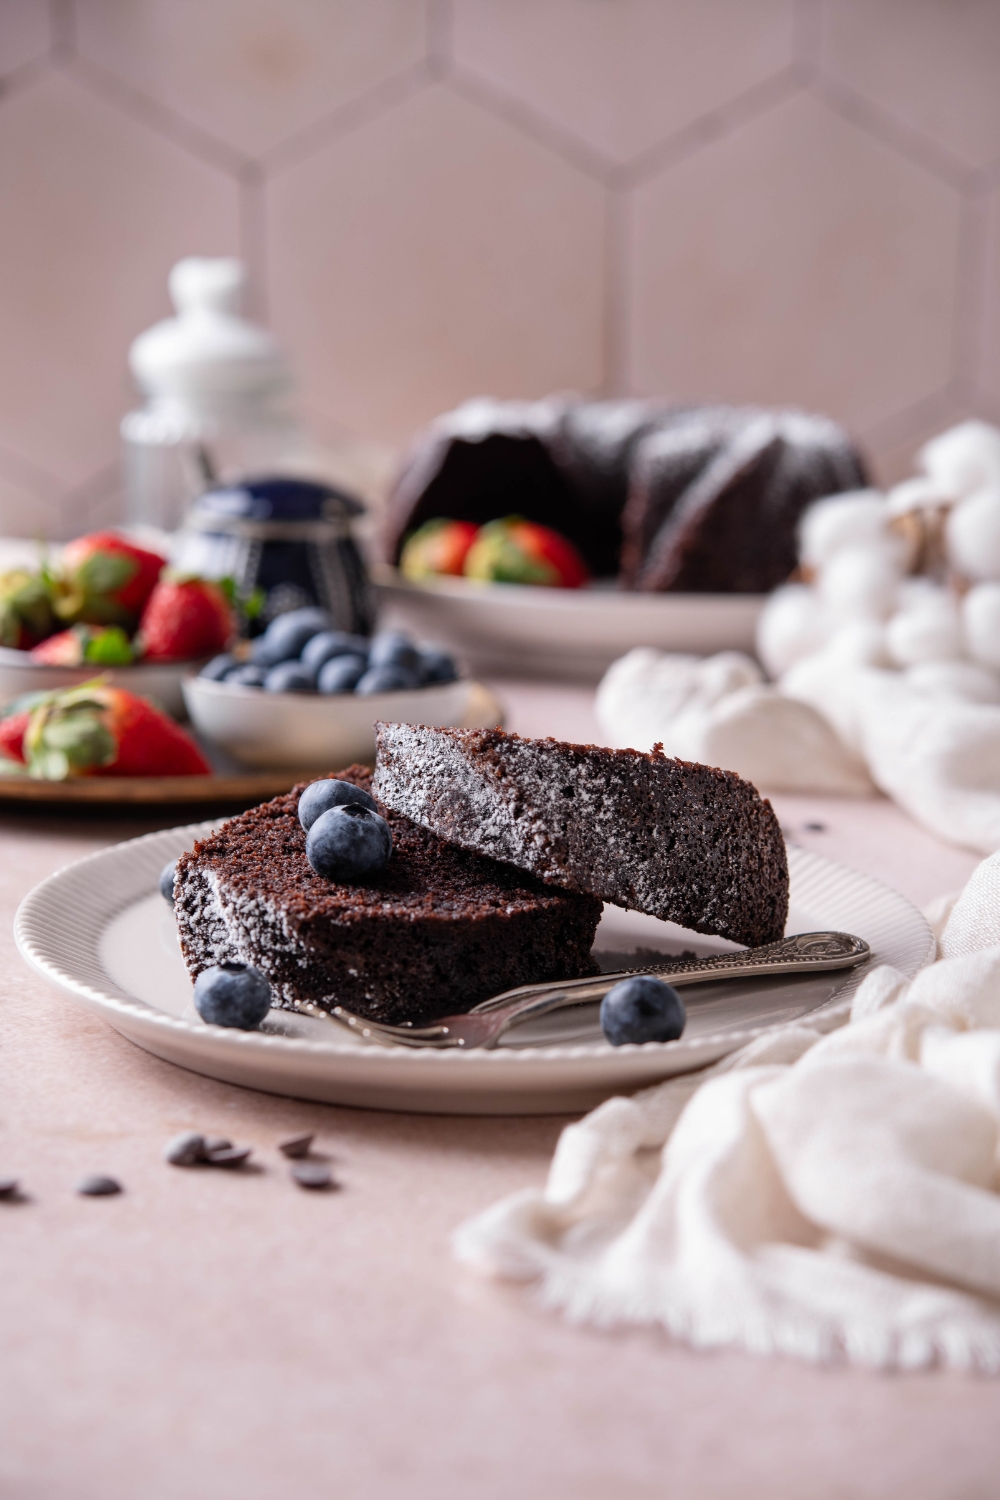 Two thick slices of chocolate pound cake are sitting on a white plate. There are fresh blueberries on the cake and a fork resting on the plate.